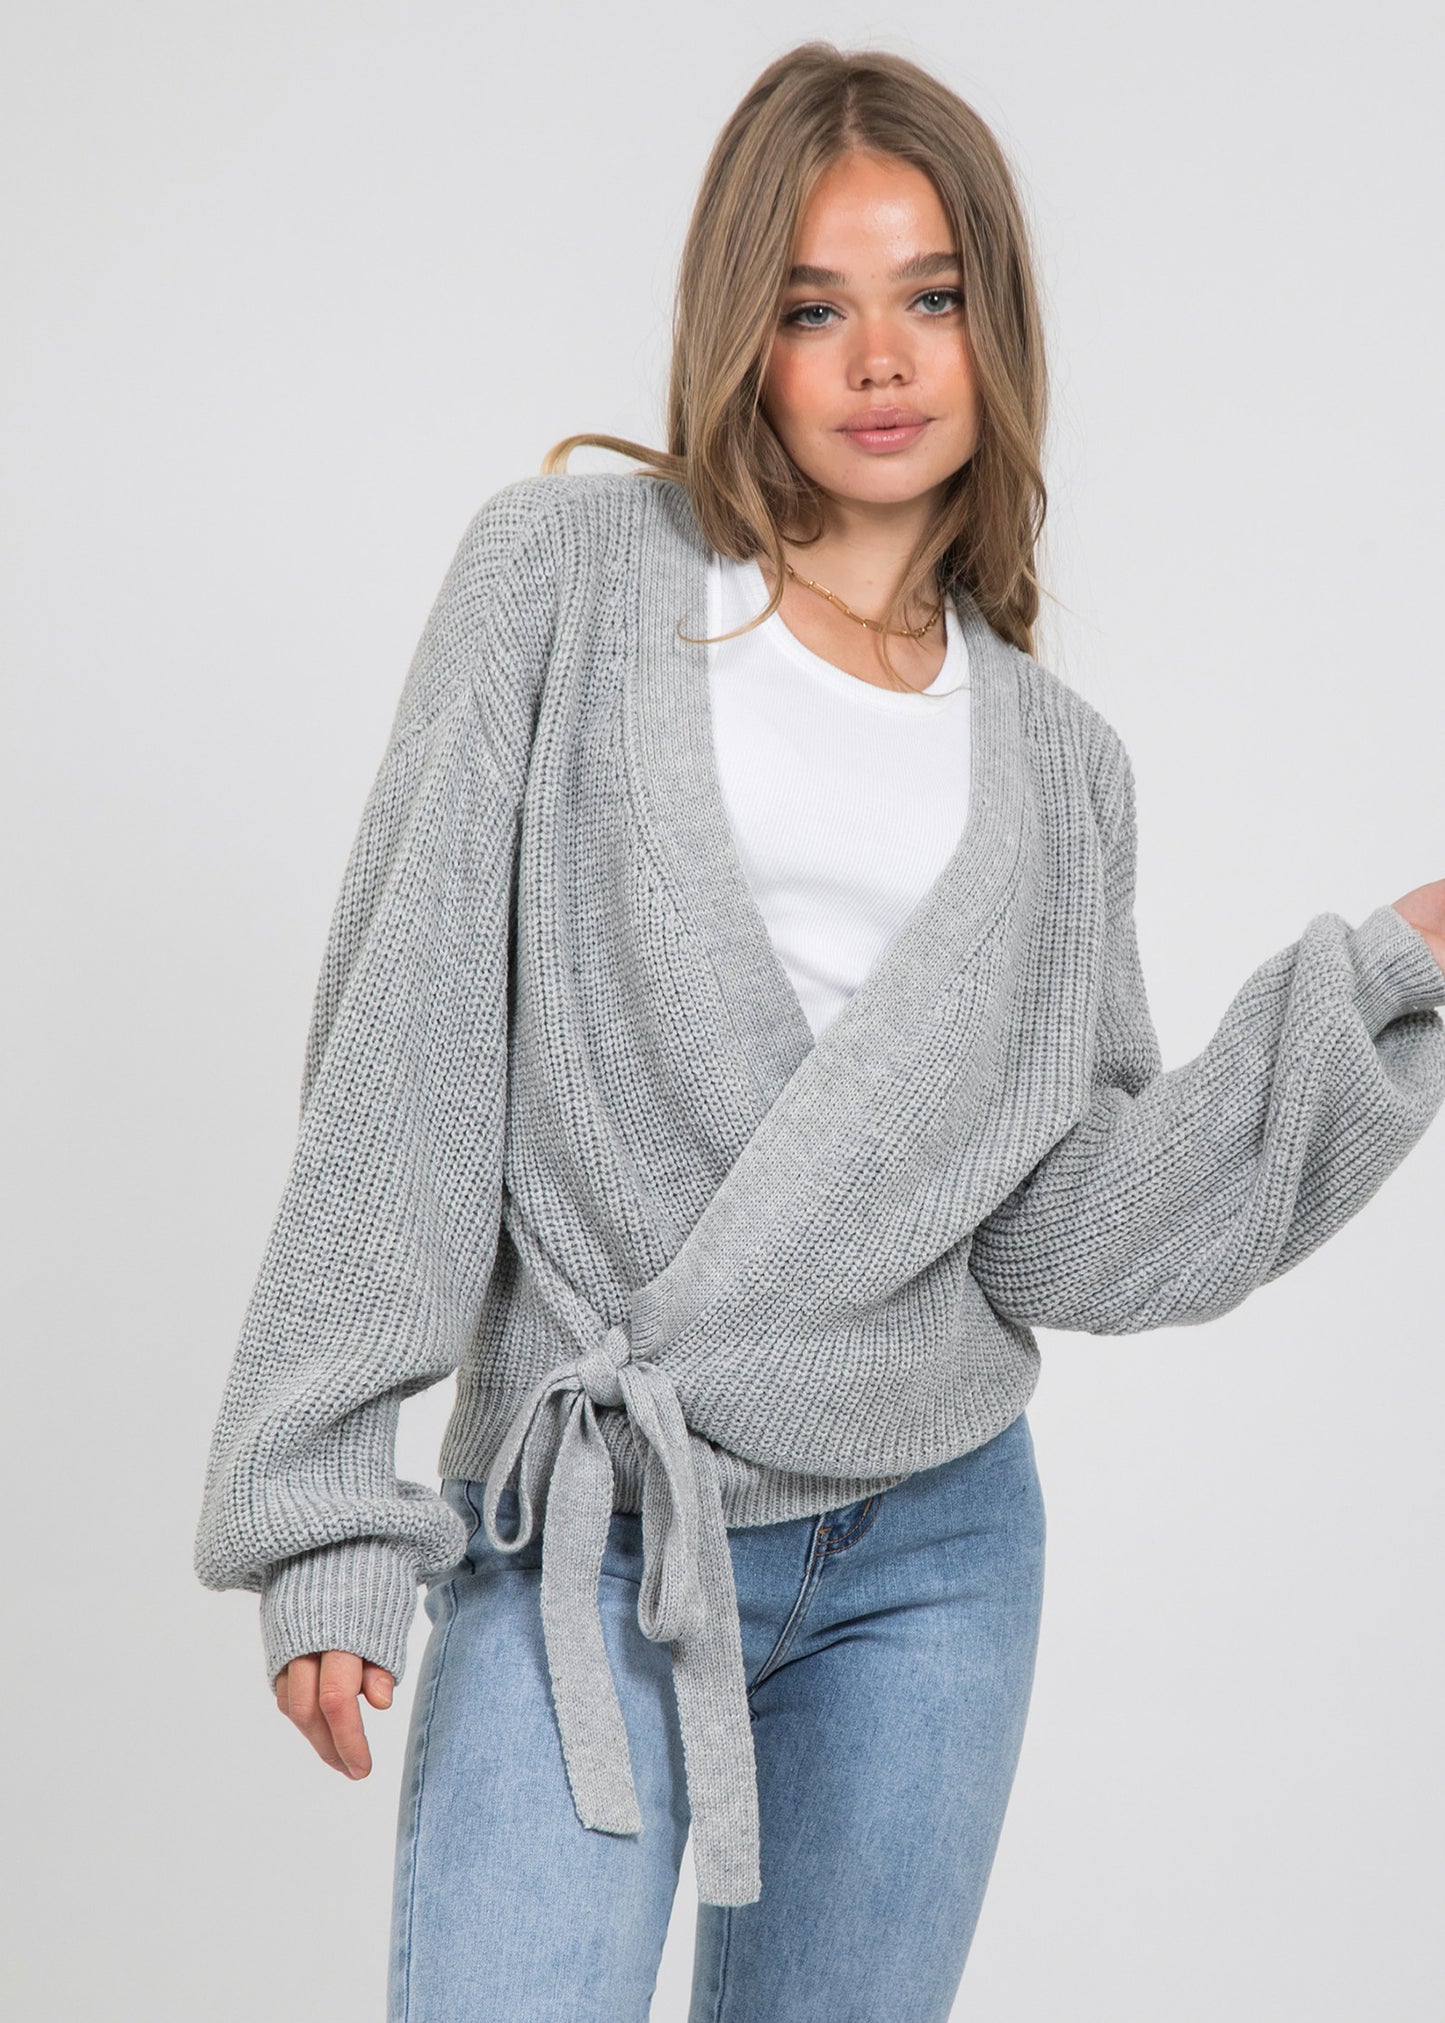 Wrap cardigan with tie front in grey